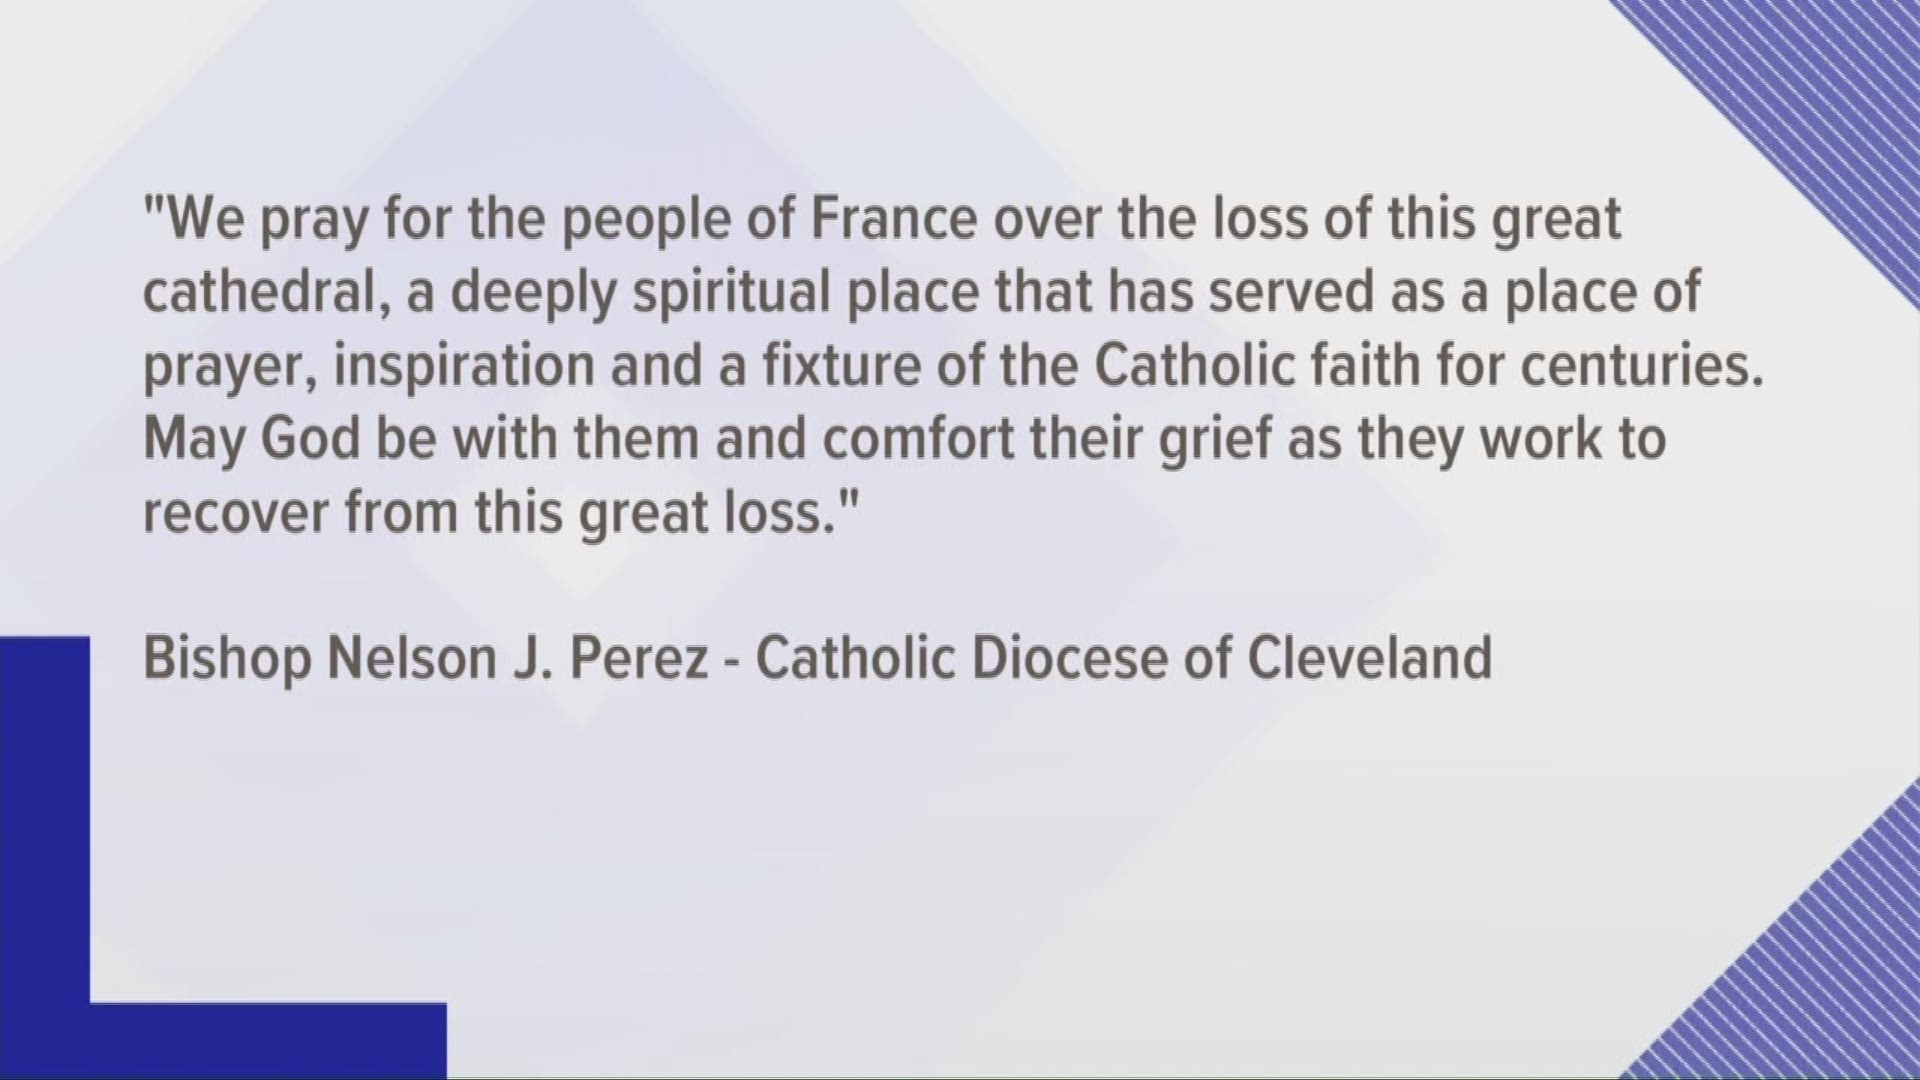 Bishop Perez issues statement on fire at Notre Dame